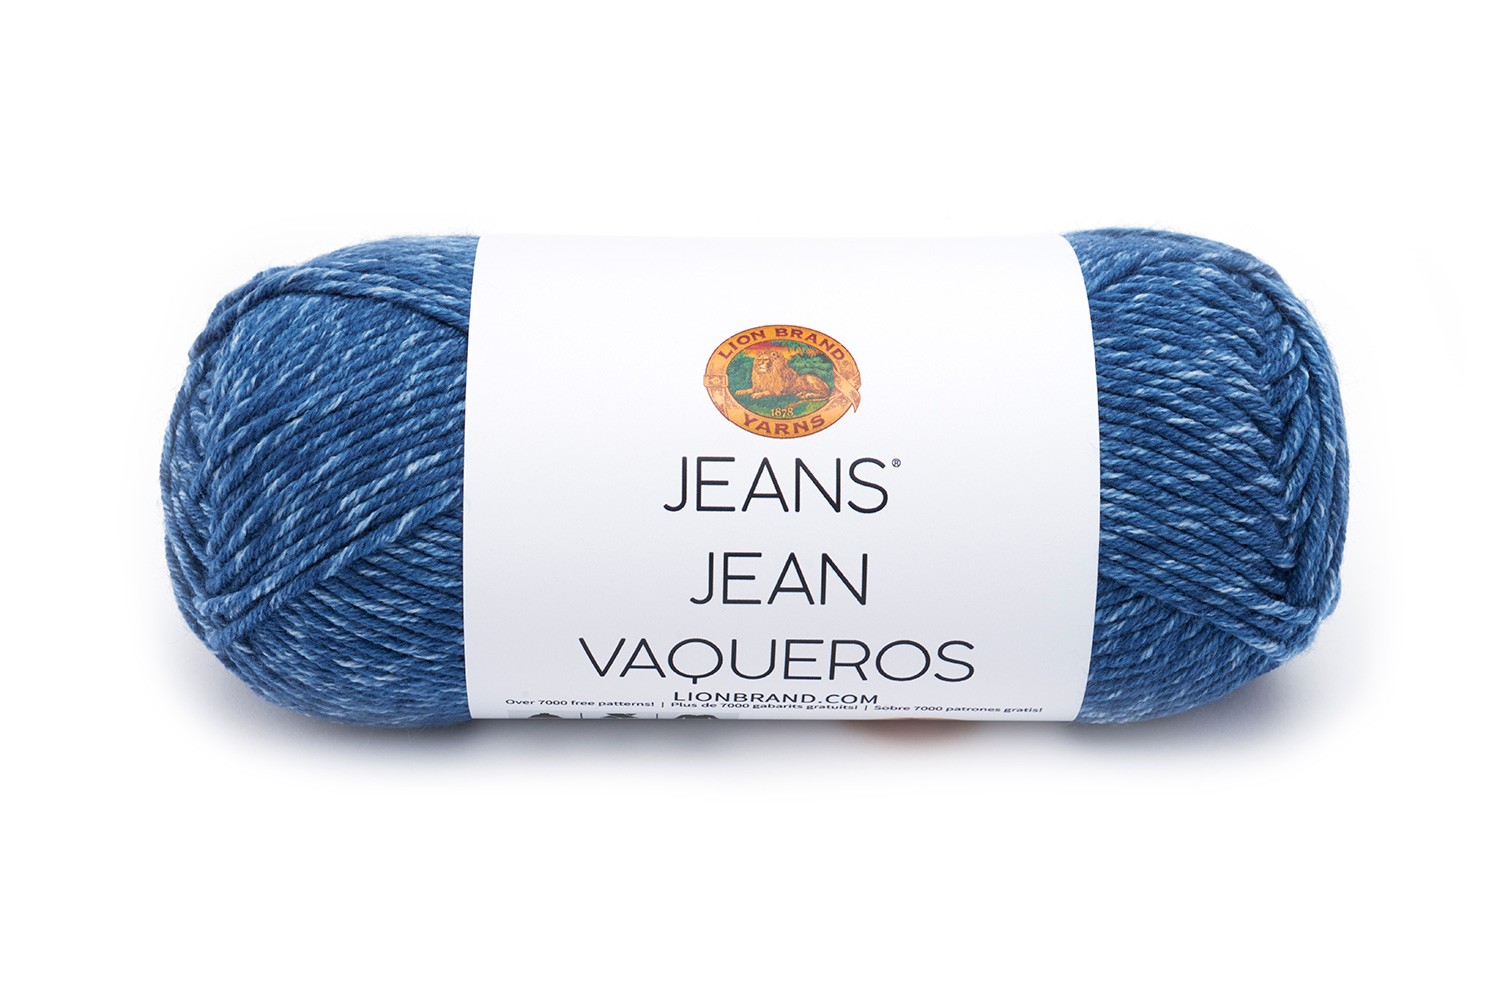 Do You Love Jeans? You’ll Love Our Jeans Yarns!